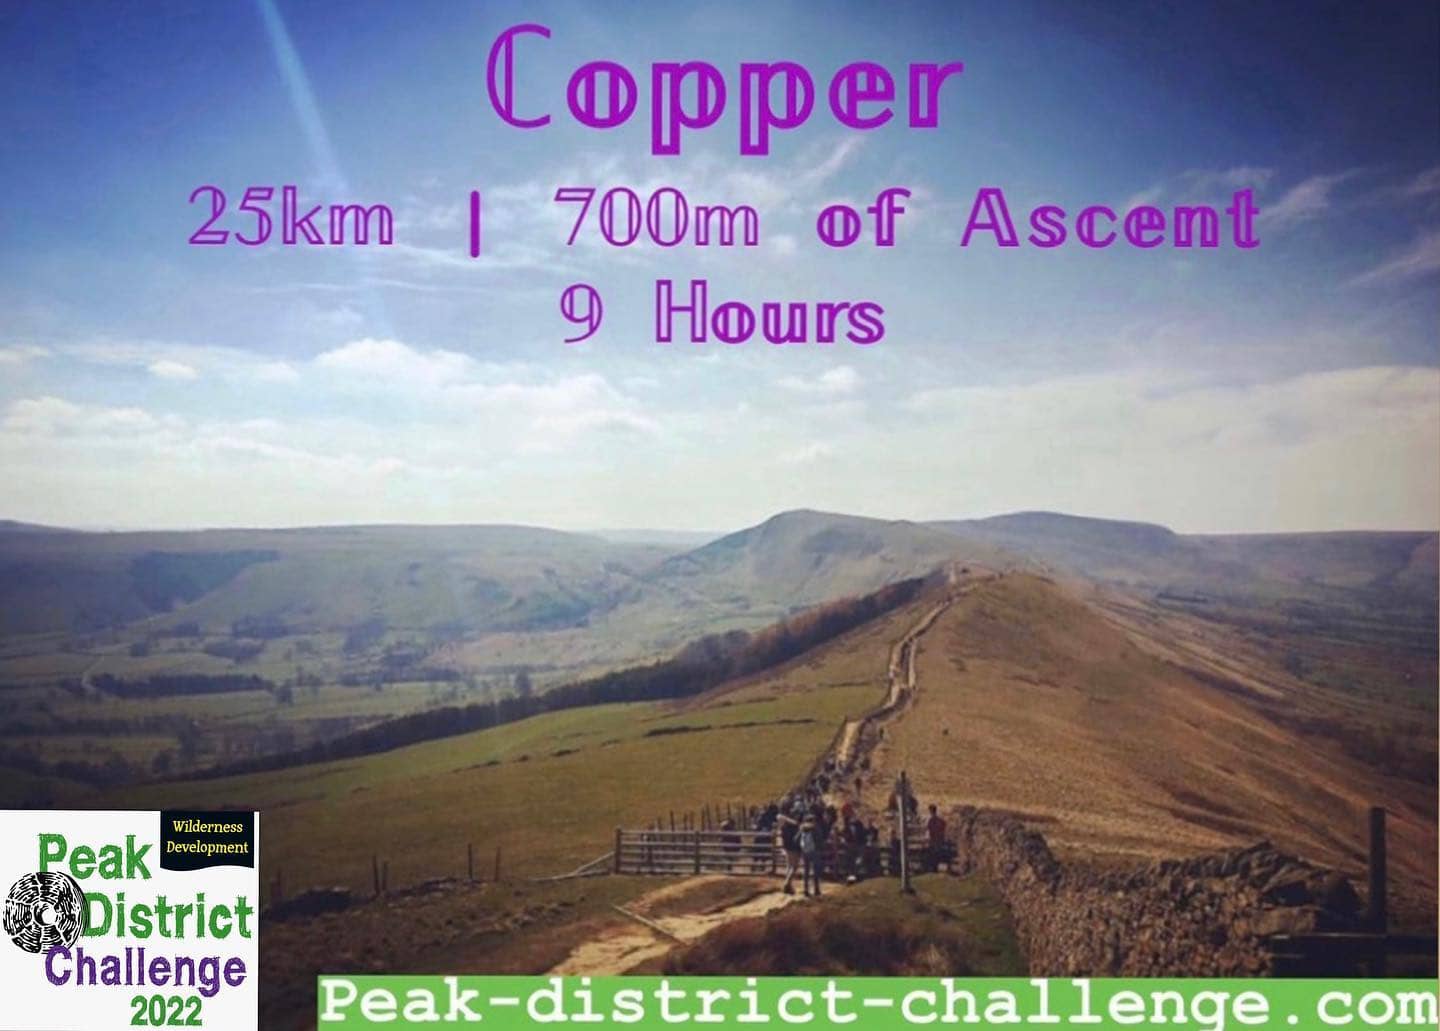 Register now for the Peak-District-Challenge.com 25km Copper Challenge for only £47 in total. 

B...